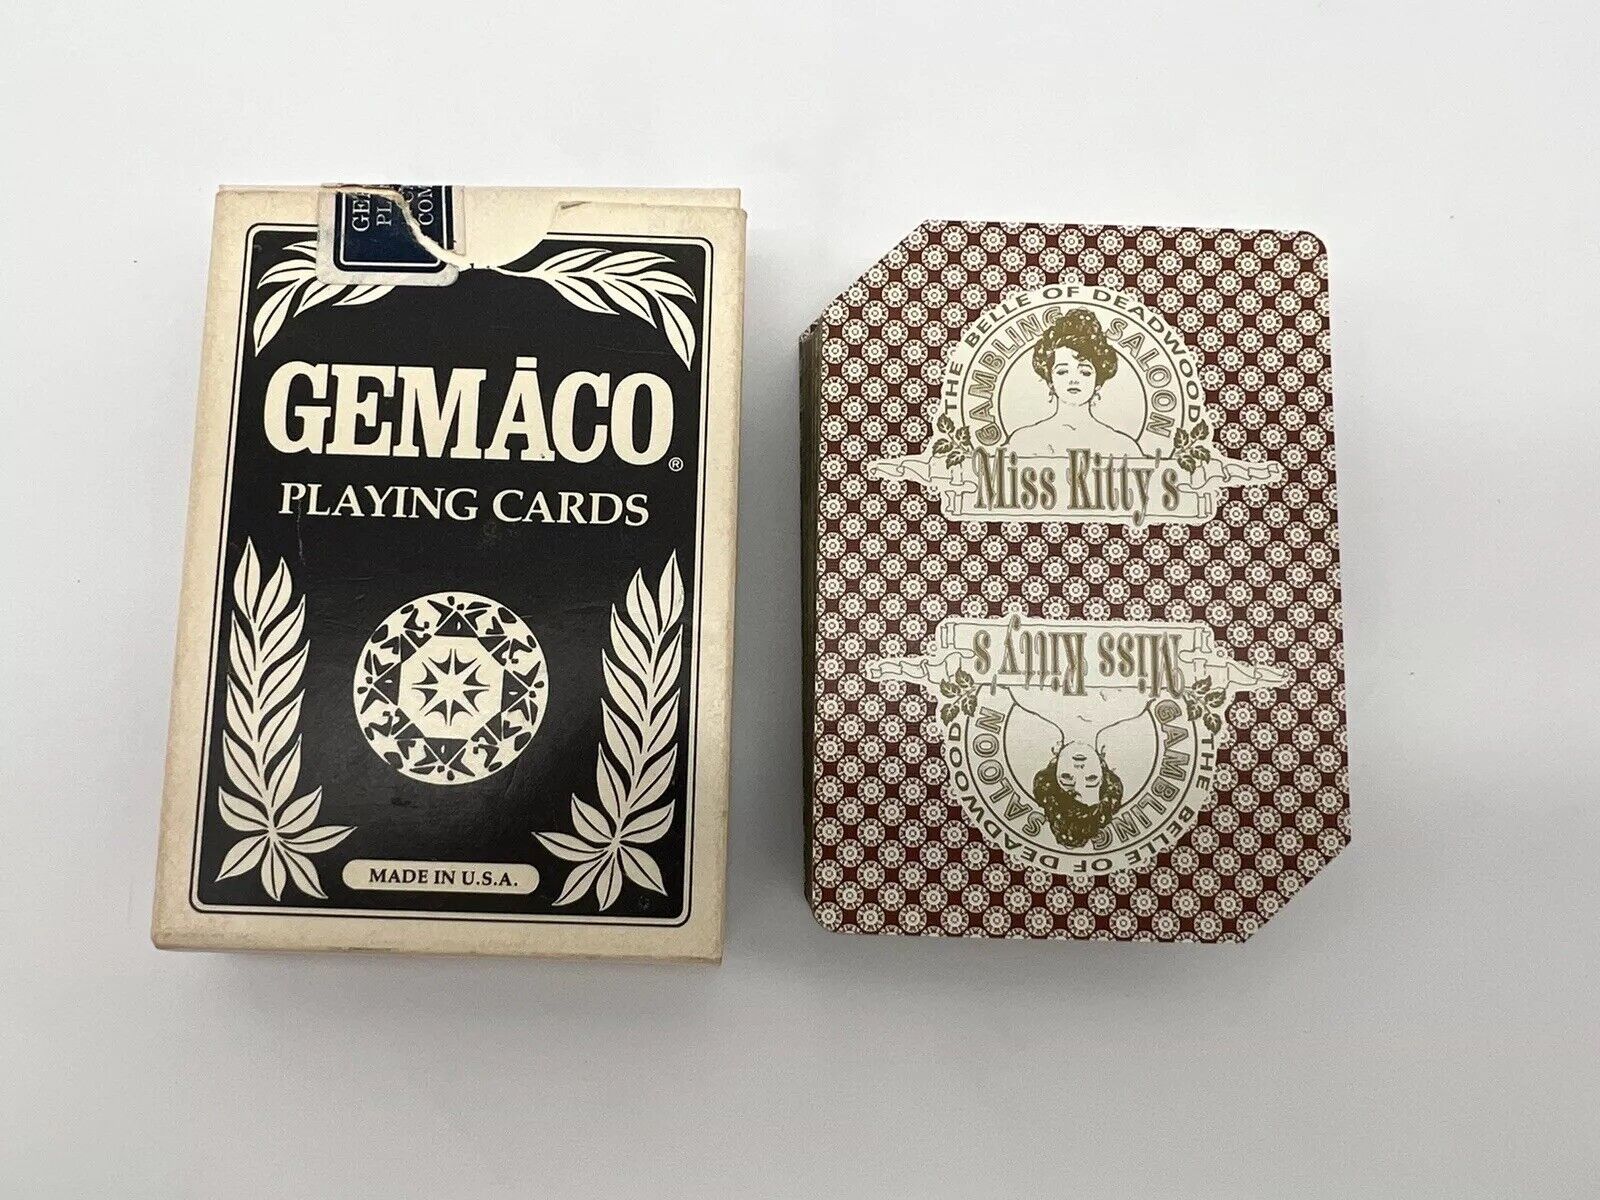 MISS KITTY'S  GAMBLING SALOON Gemaco Vintage Playing Cards Deadwood, SD